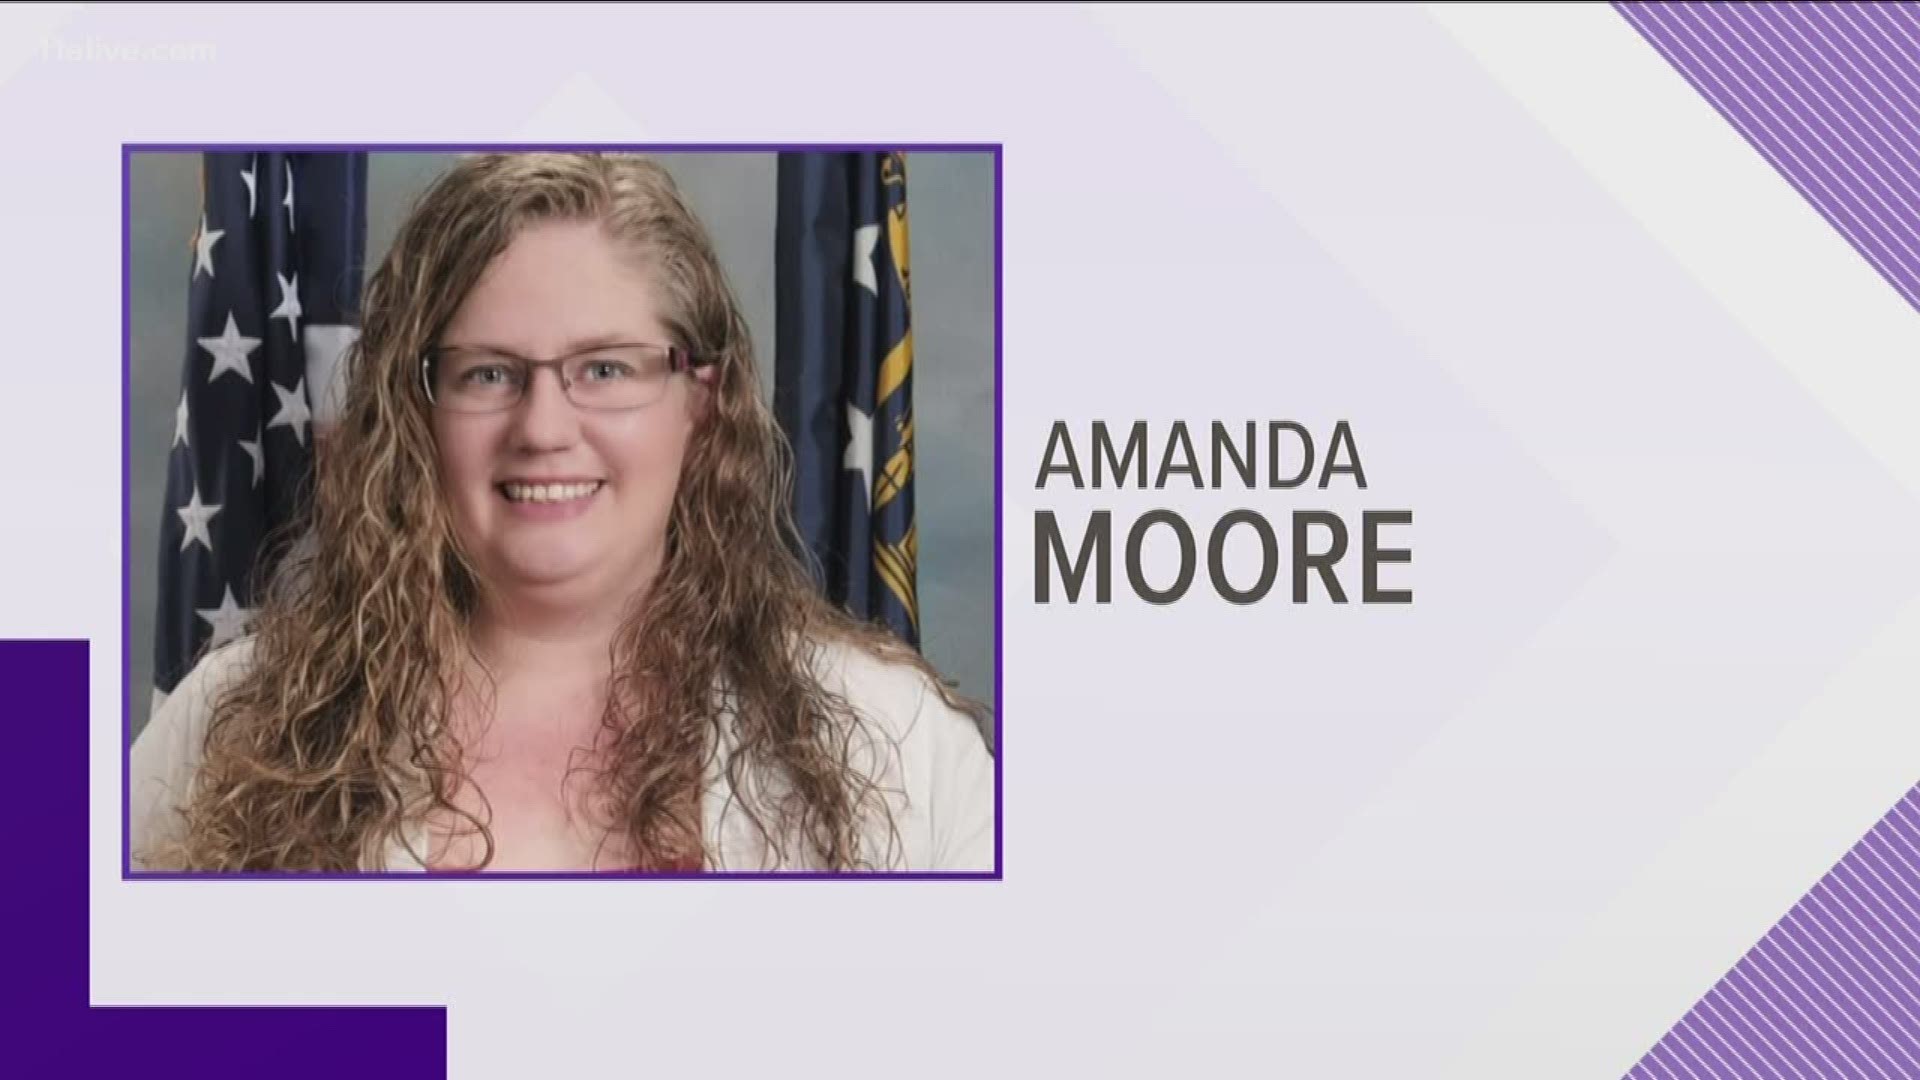 Amanda Moore, 34, is in stable condition after what investigators believe was a domestic dispute.